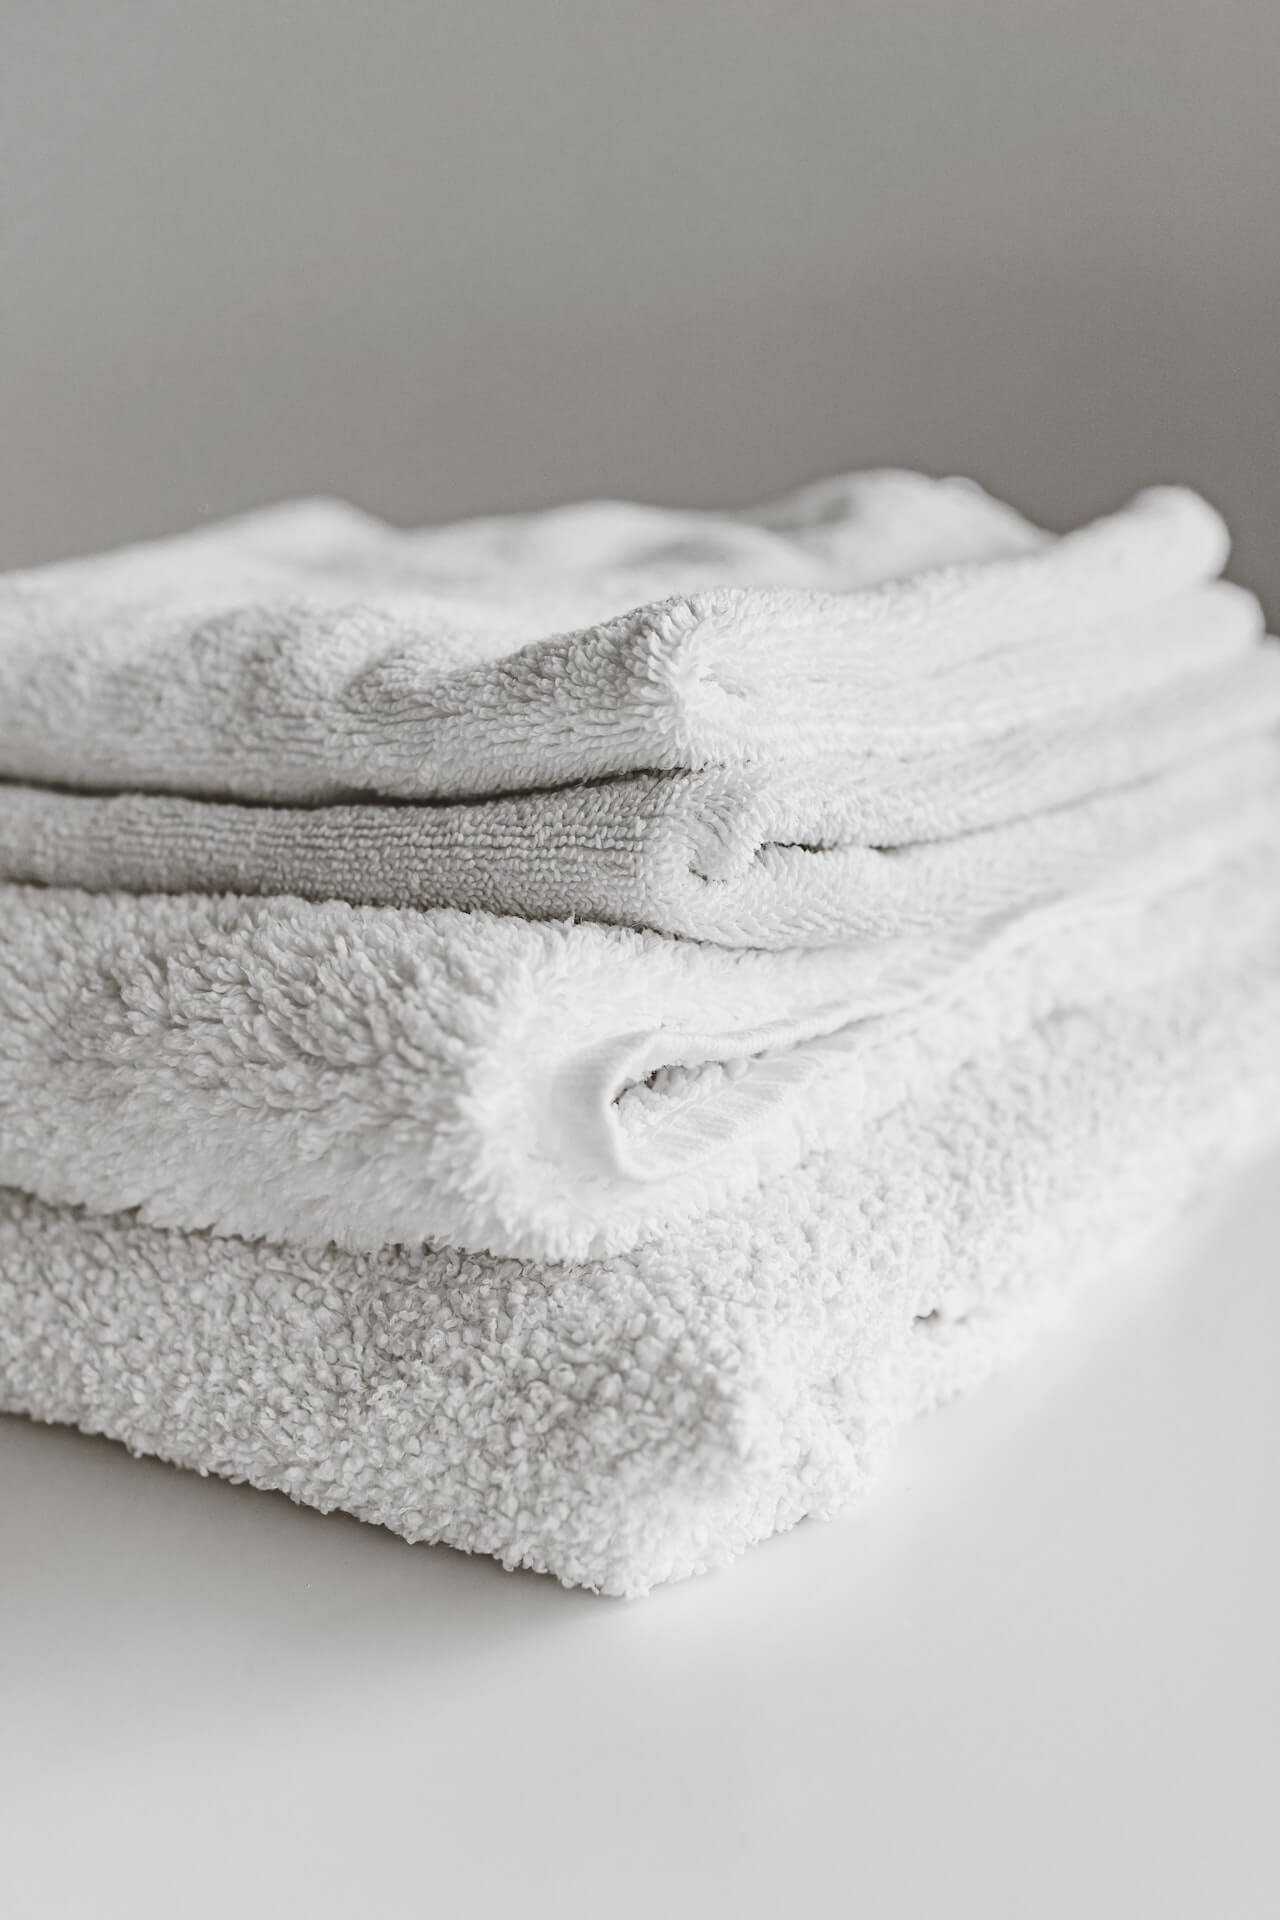 How to Make Old Towels Smell Fresh Again